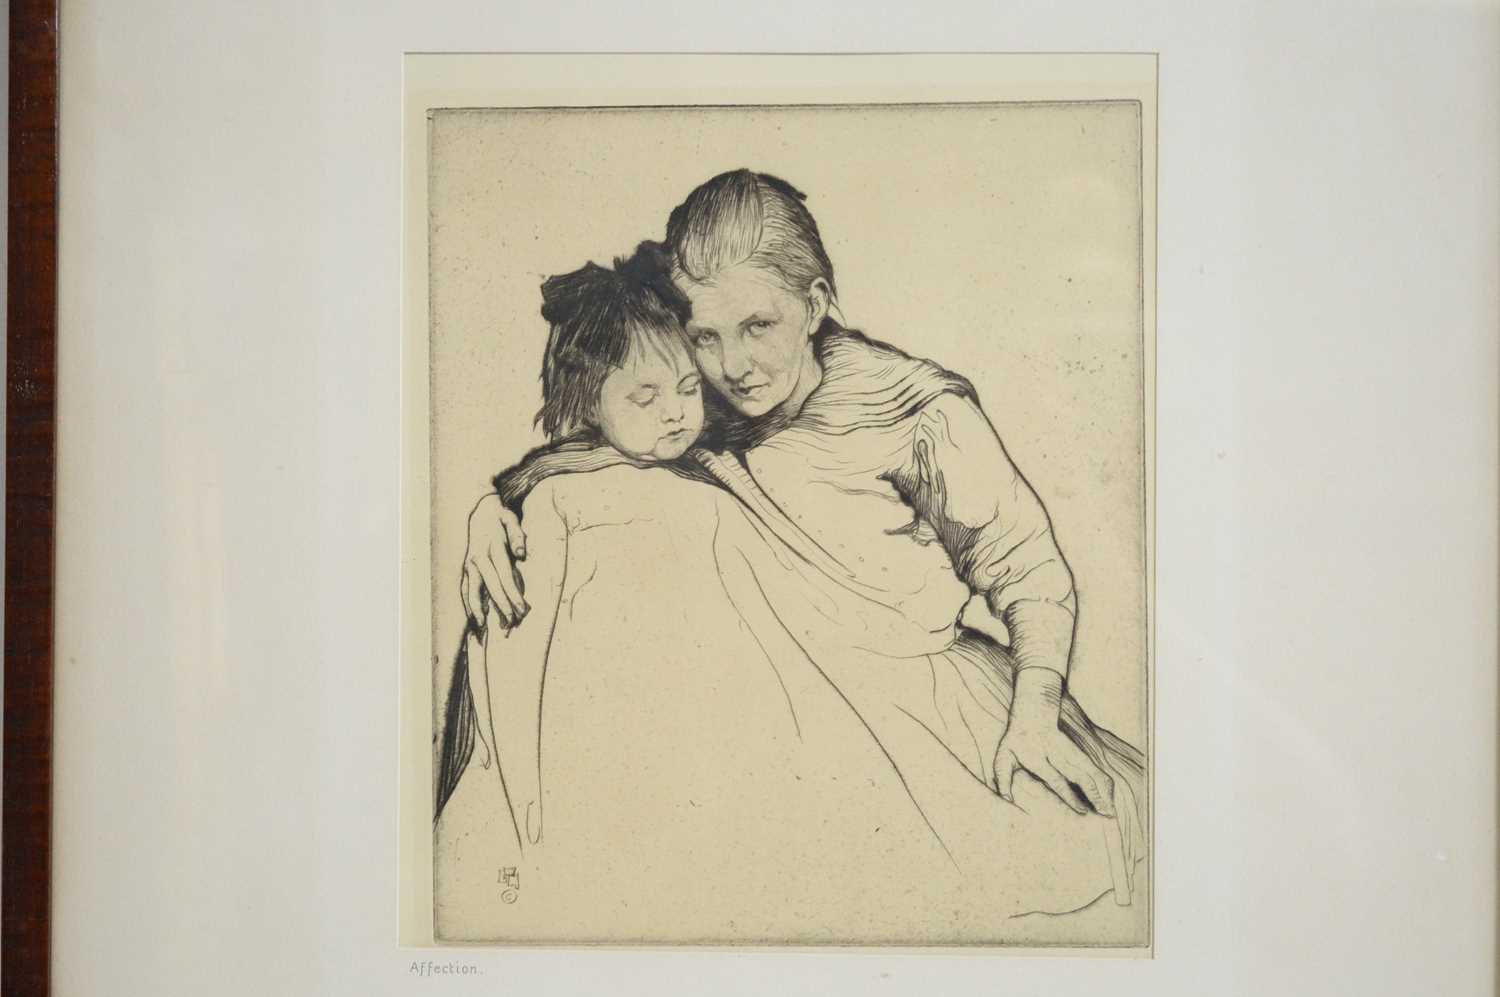 William Lee Hankey - The Toy, and Affection | etchings - Image 3 of 3